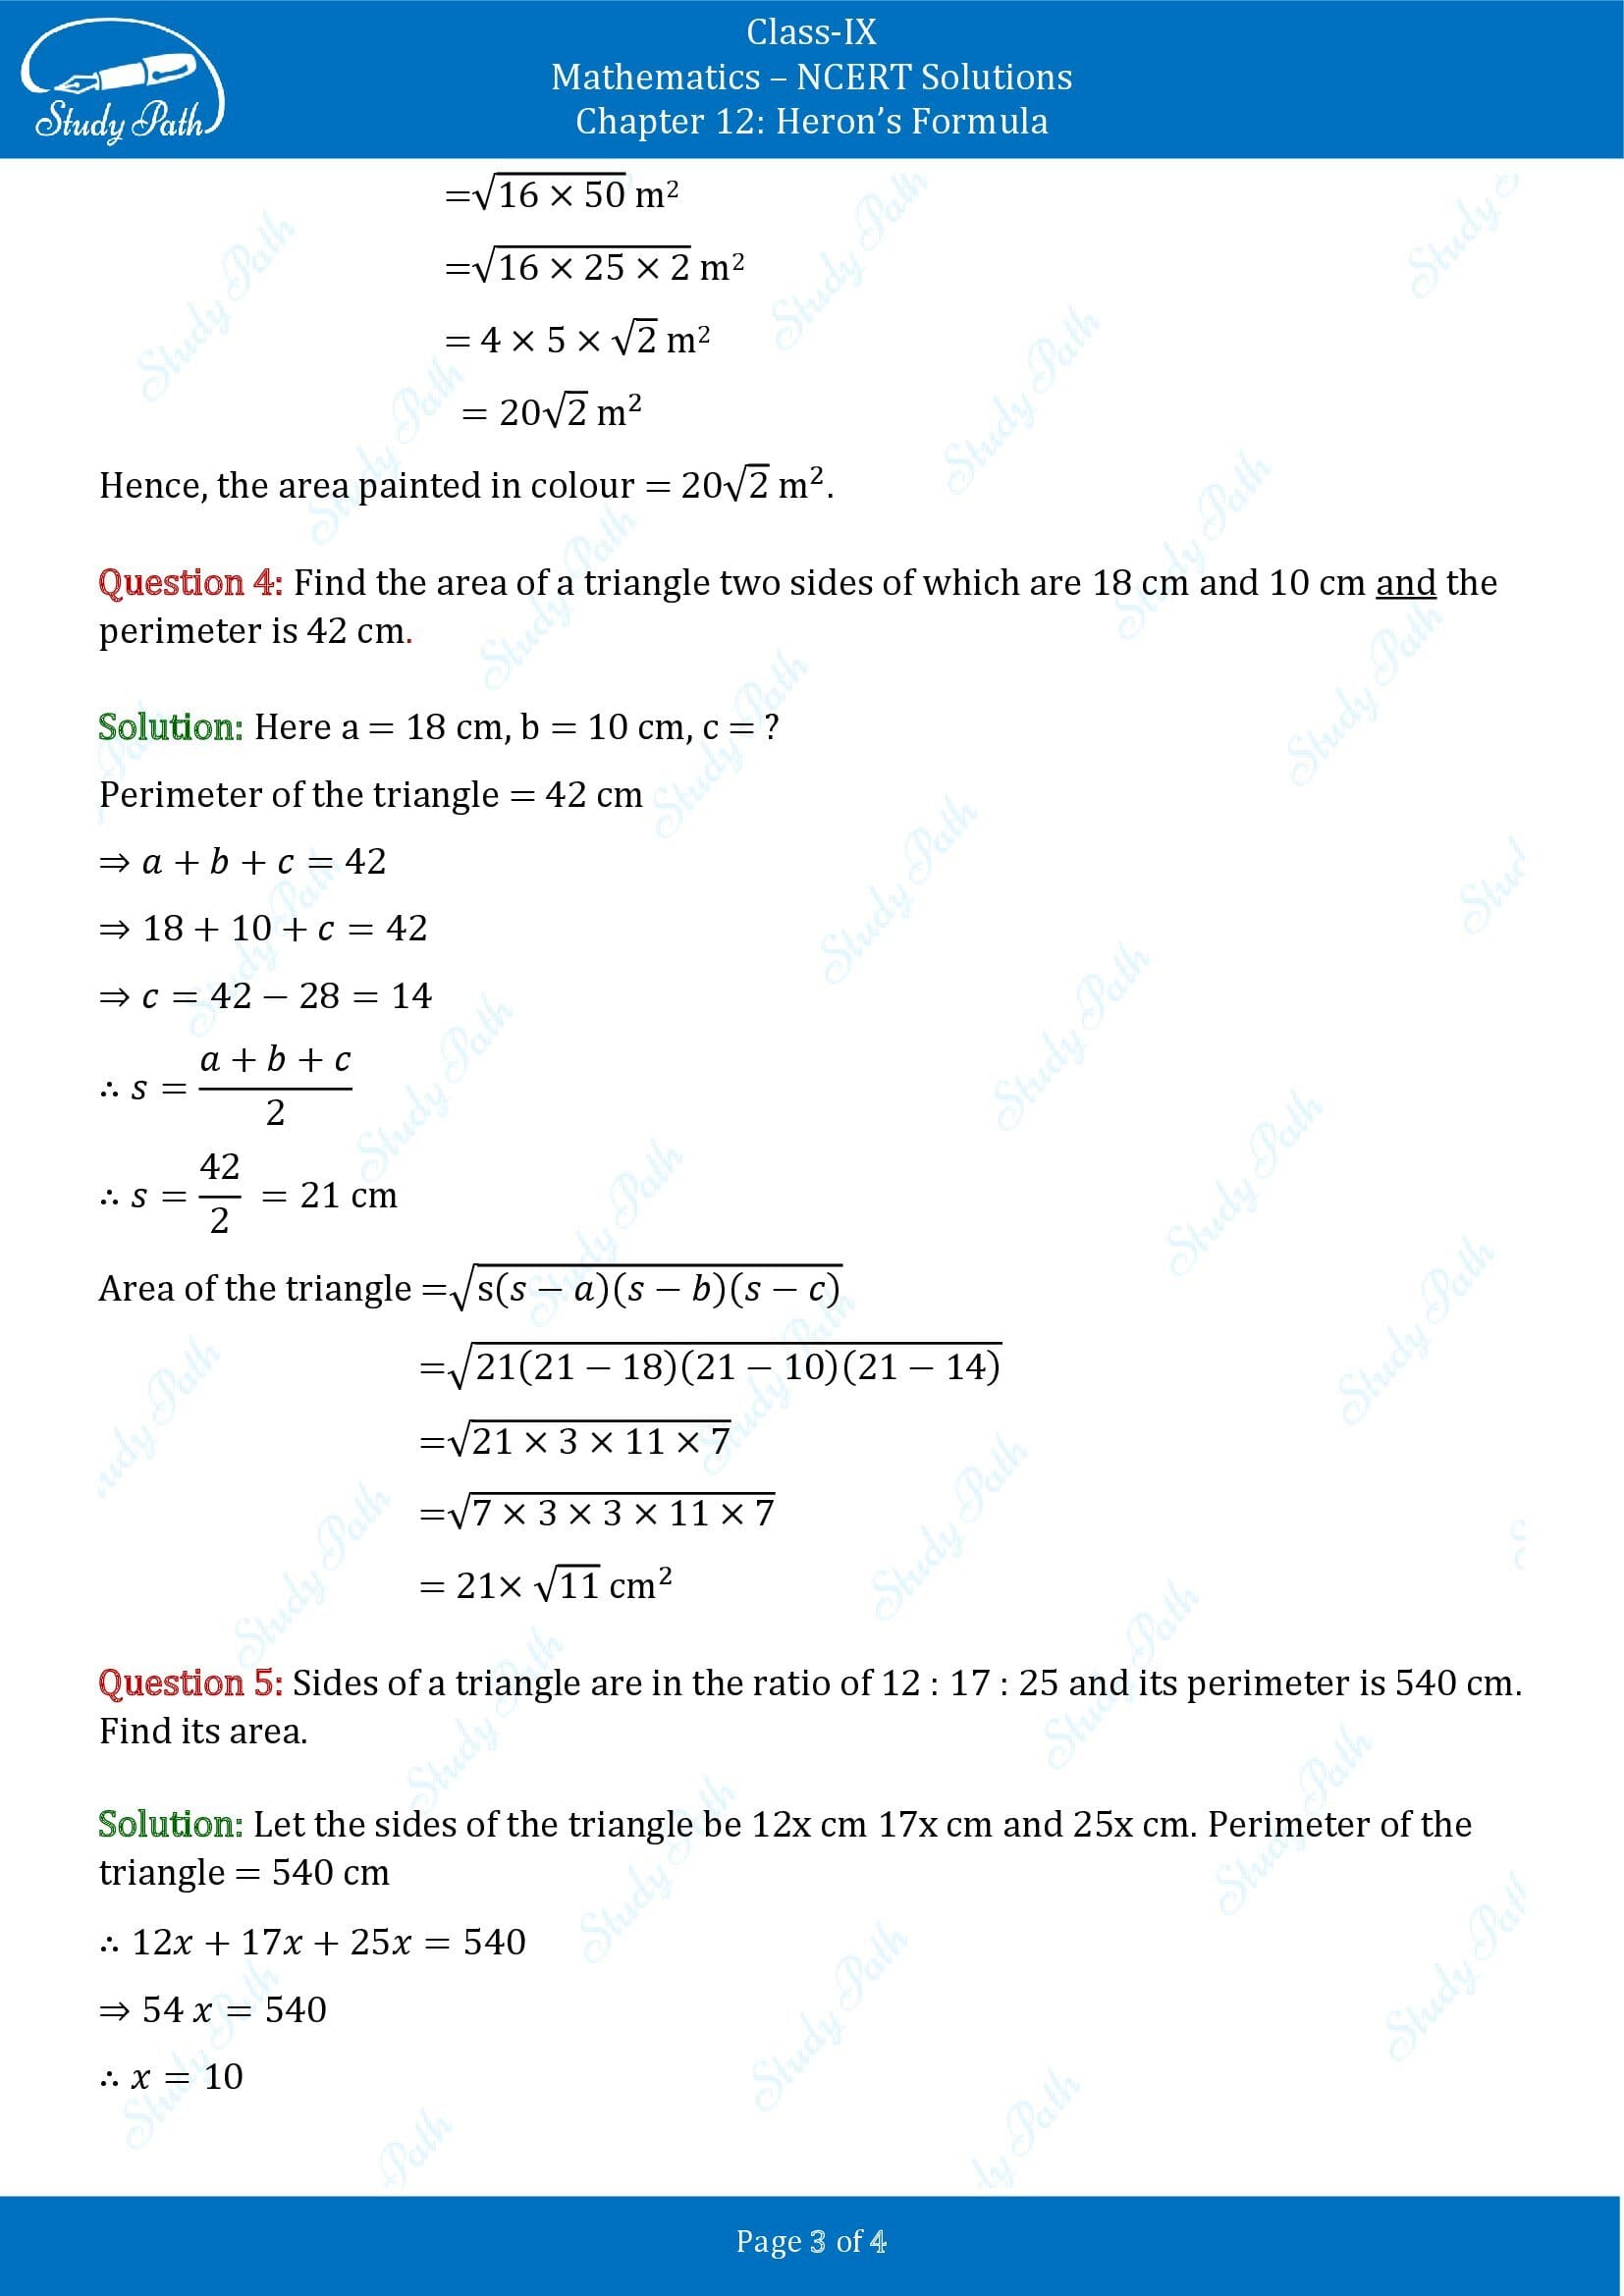 NCERT Solutions for Class 9 Maths Chapter 12 Herons Formula Exercise 12.1 00003